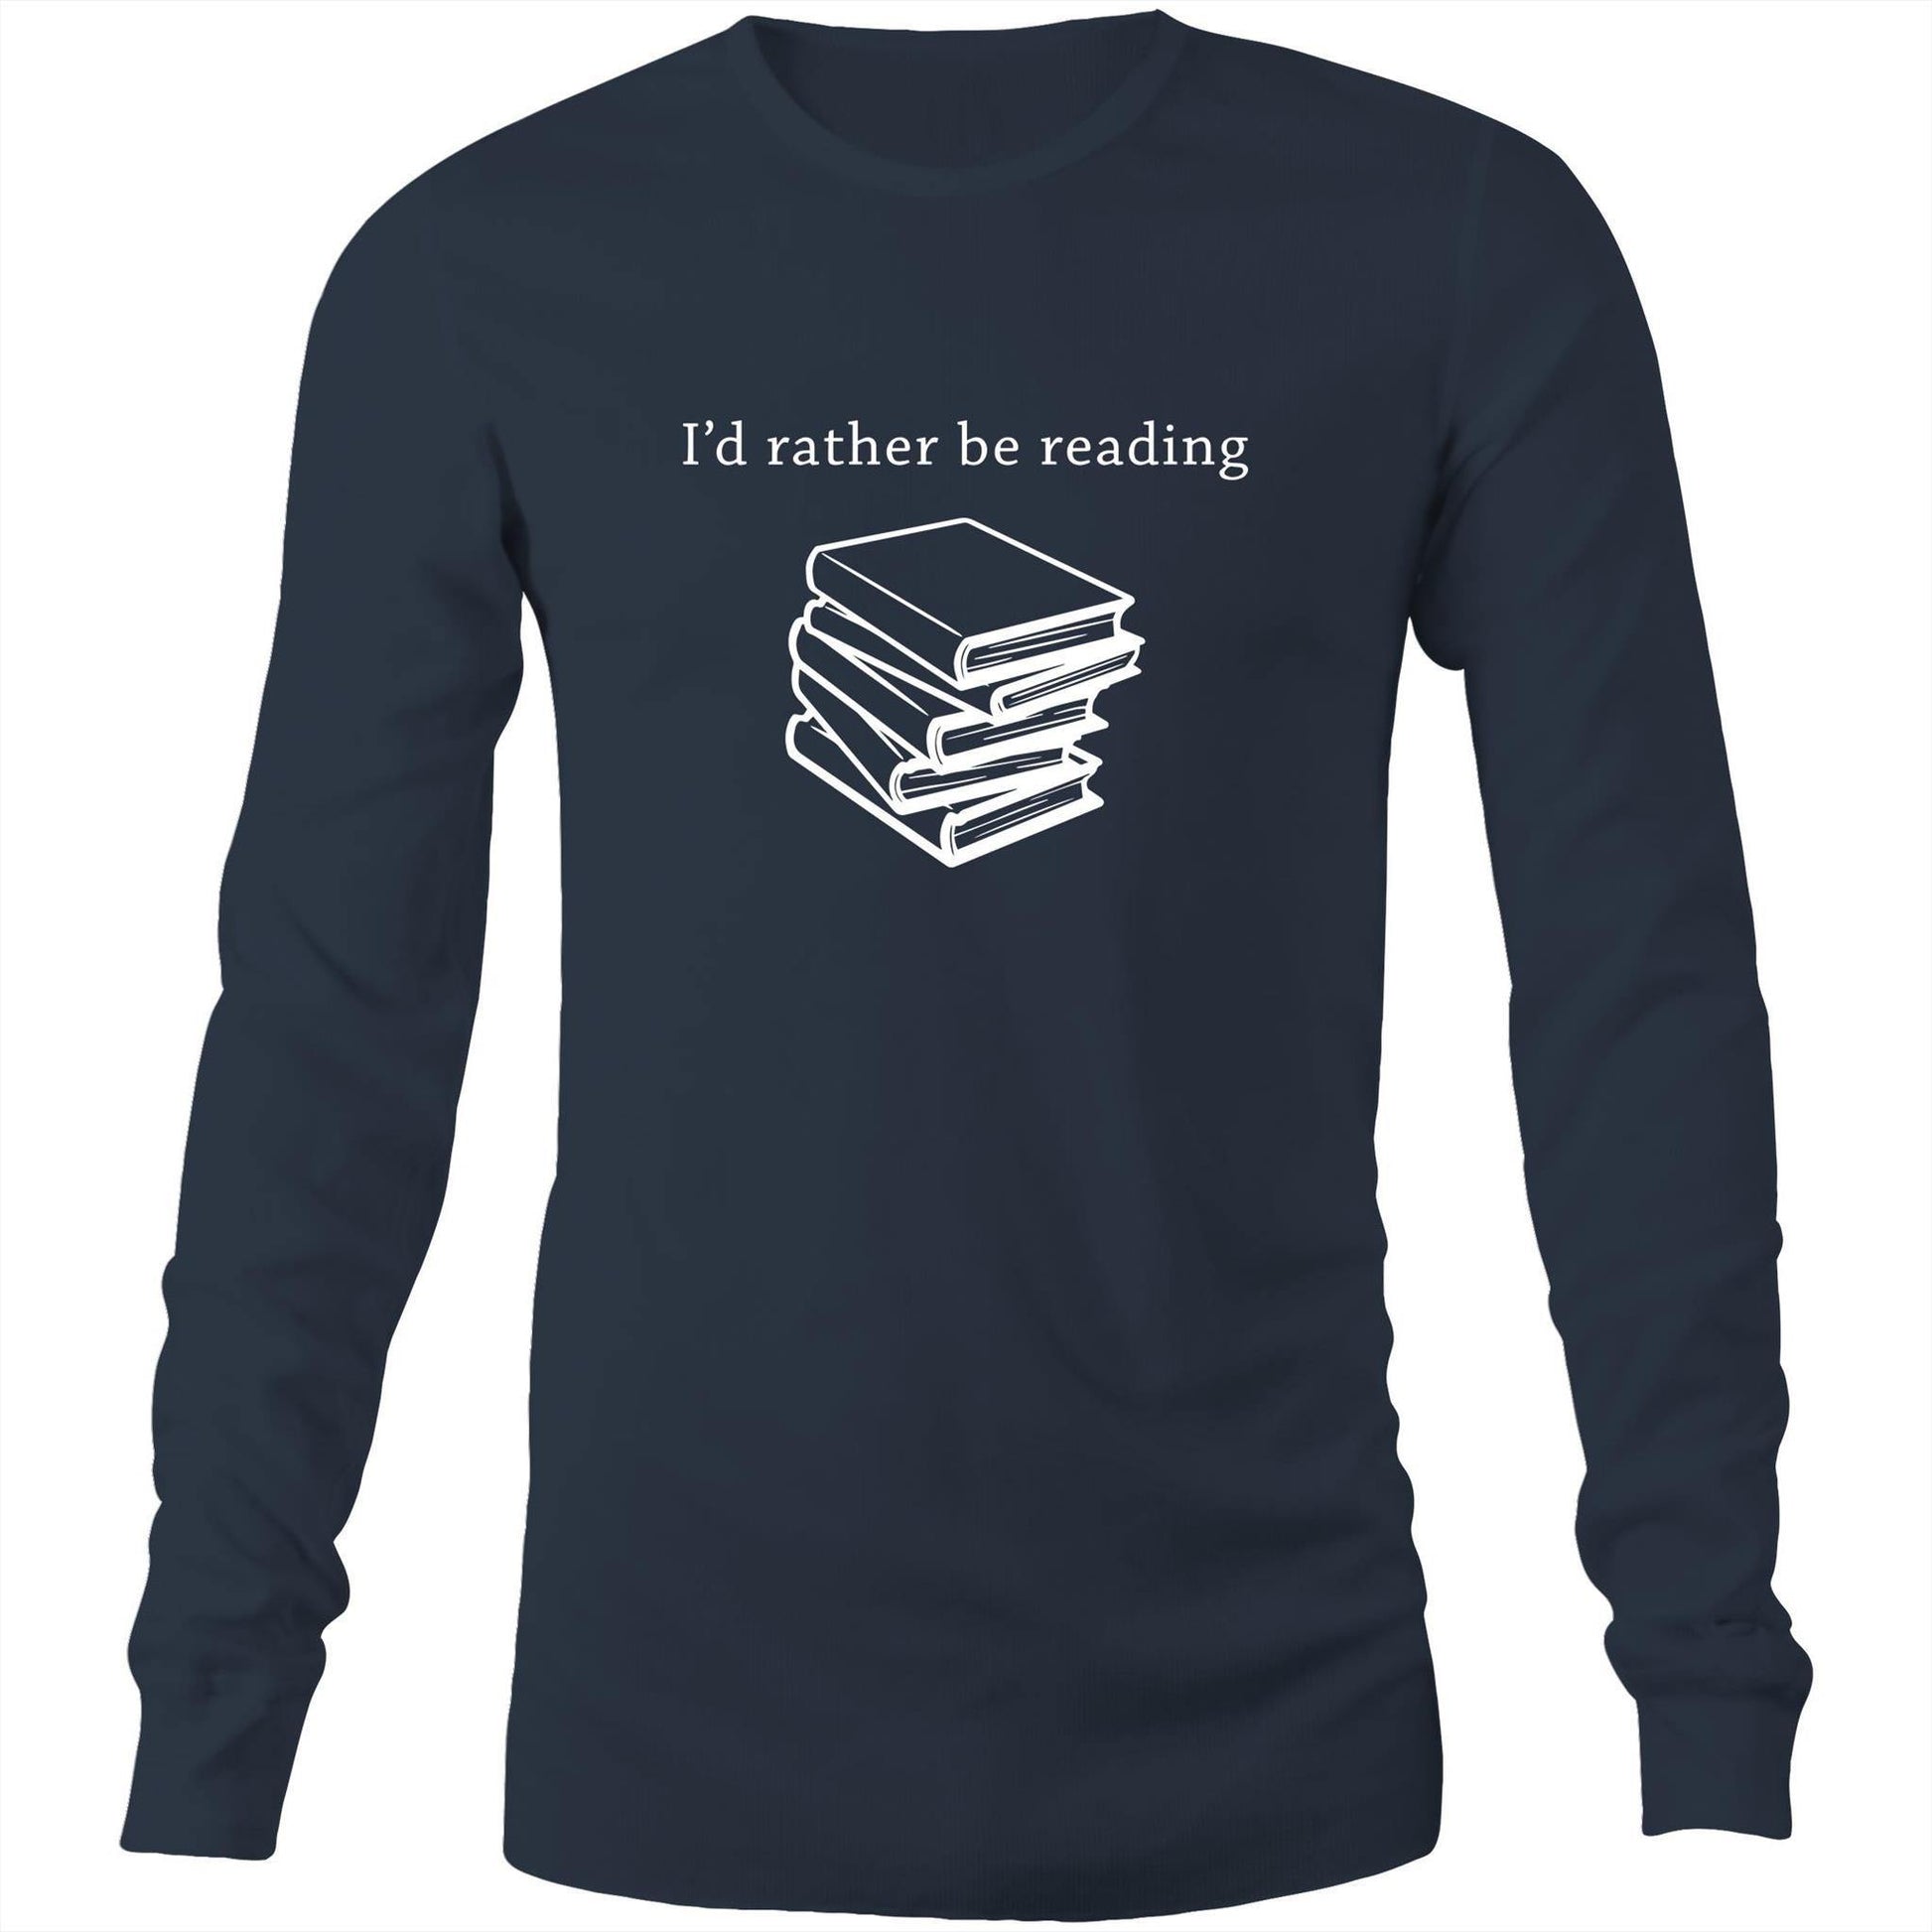 I'd Rather Be Reading - Long Sleeve T-Shirt Navy Unisex Long Sleeve T-shirt Mens Womens